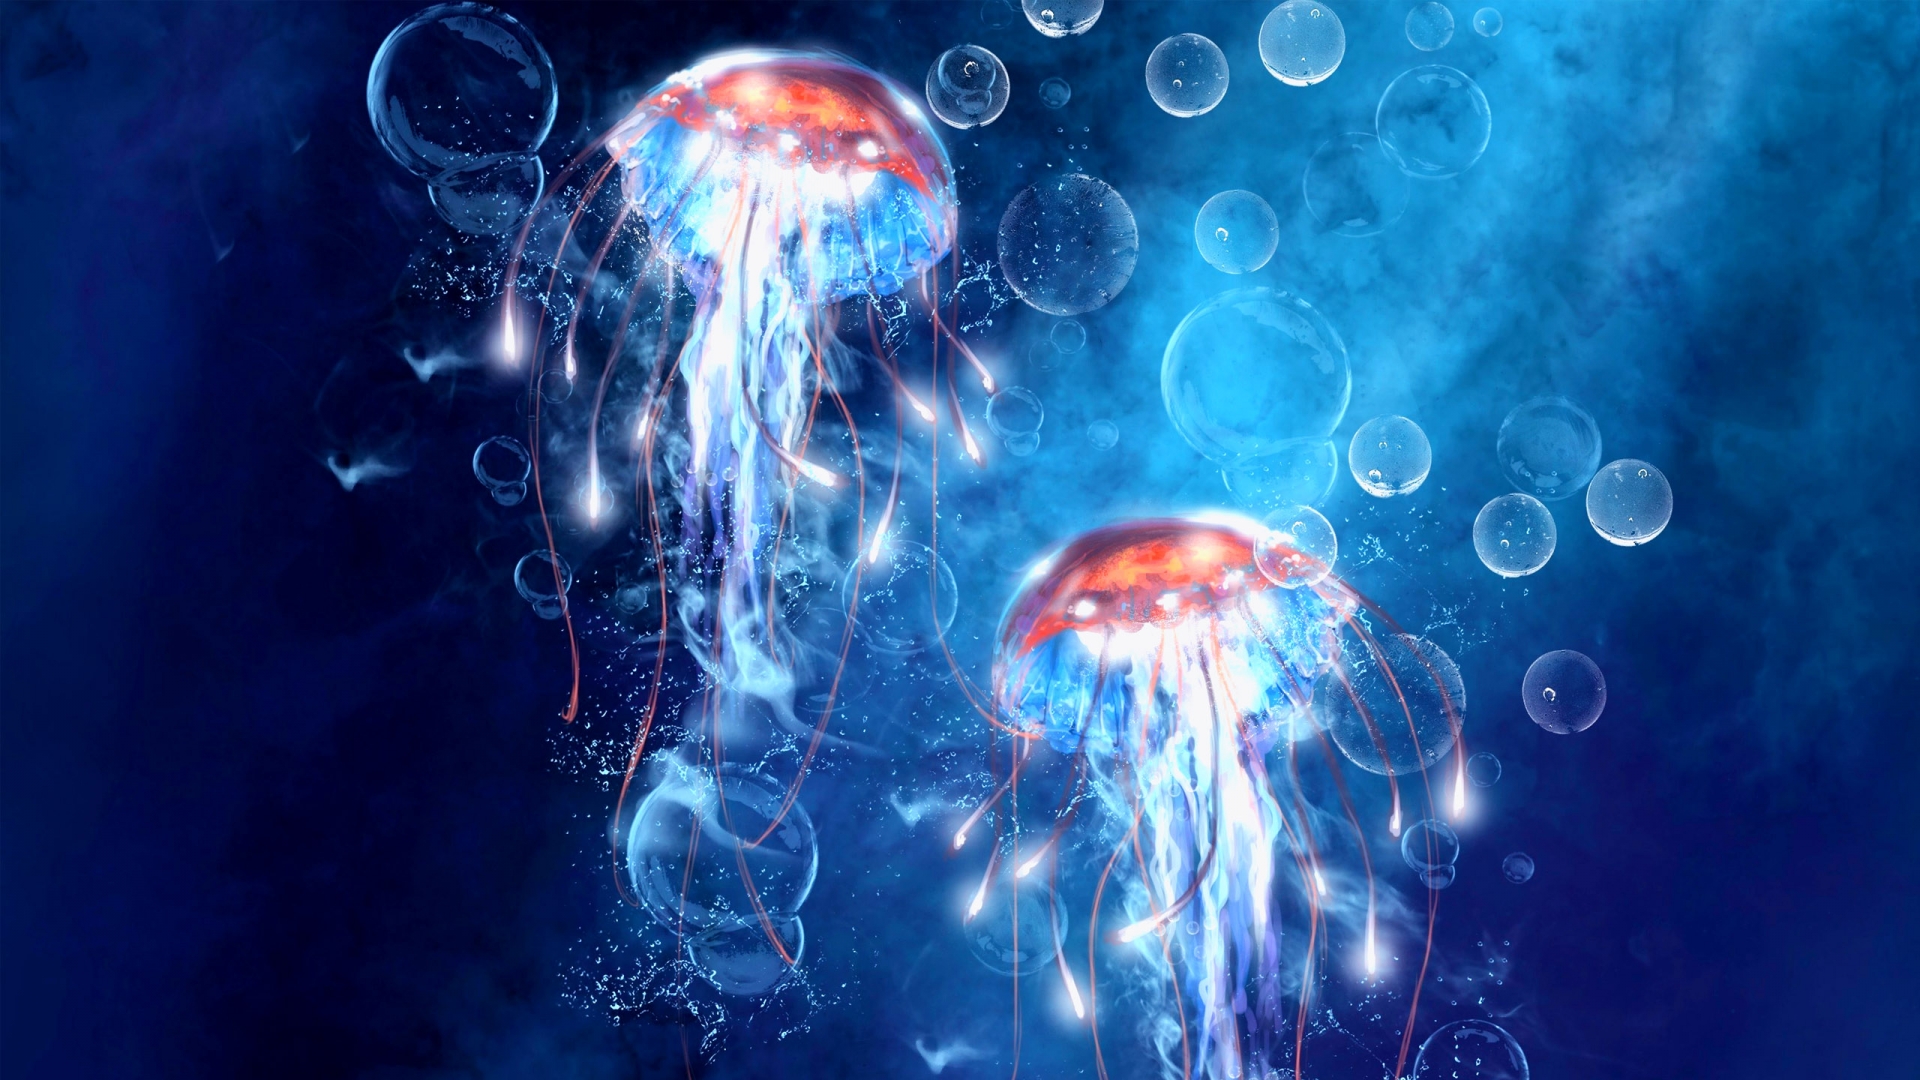 Amazing Jellyfish Wallpaper For iPhone